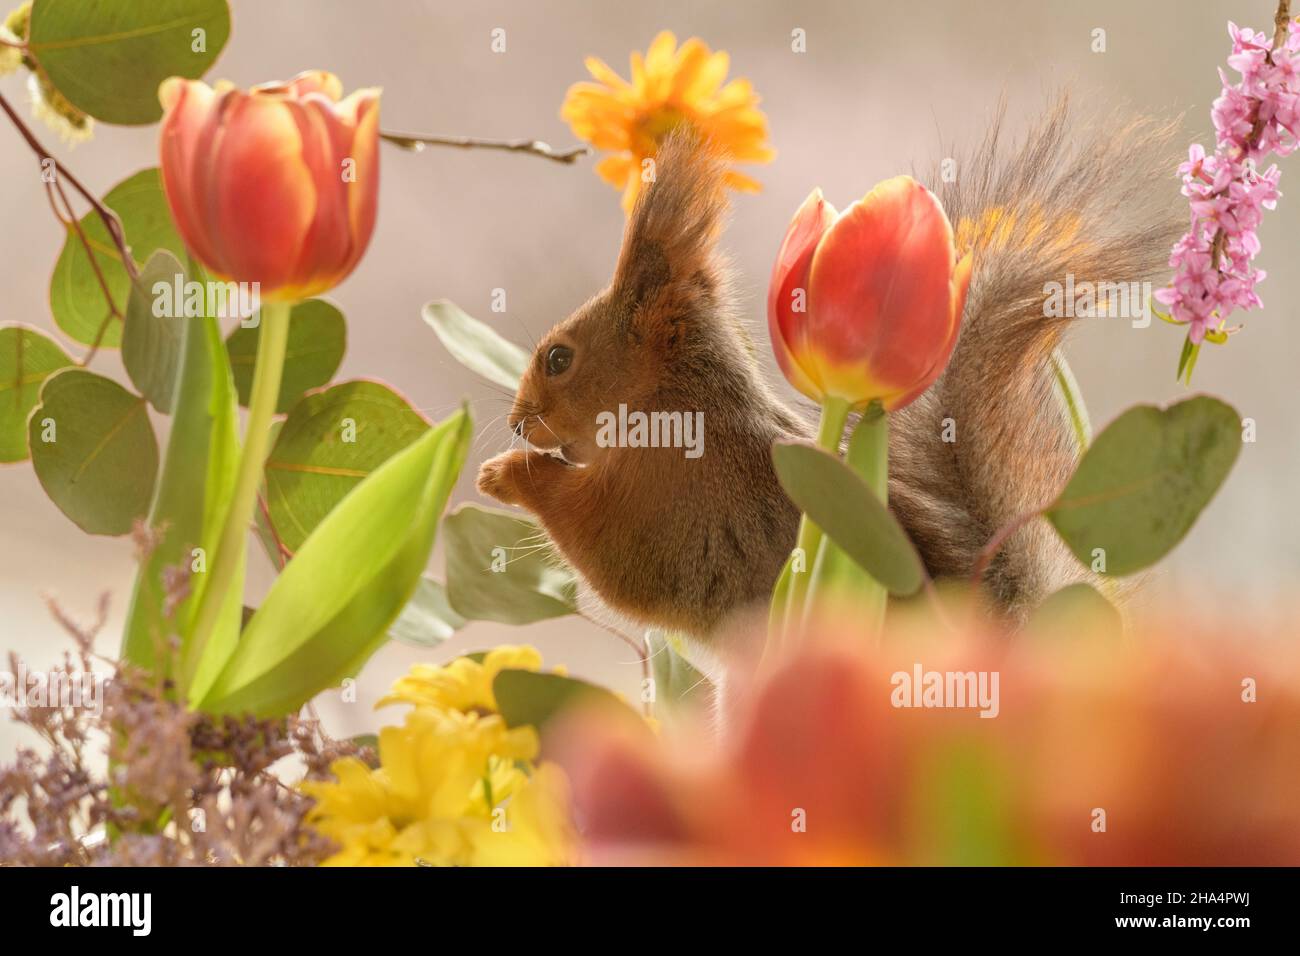 red squirrel is standing between daphne,tulip and leaves looking away Stock Photo